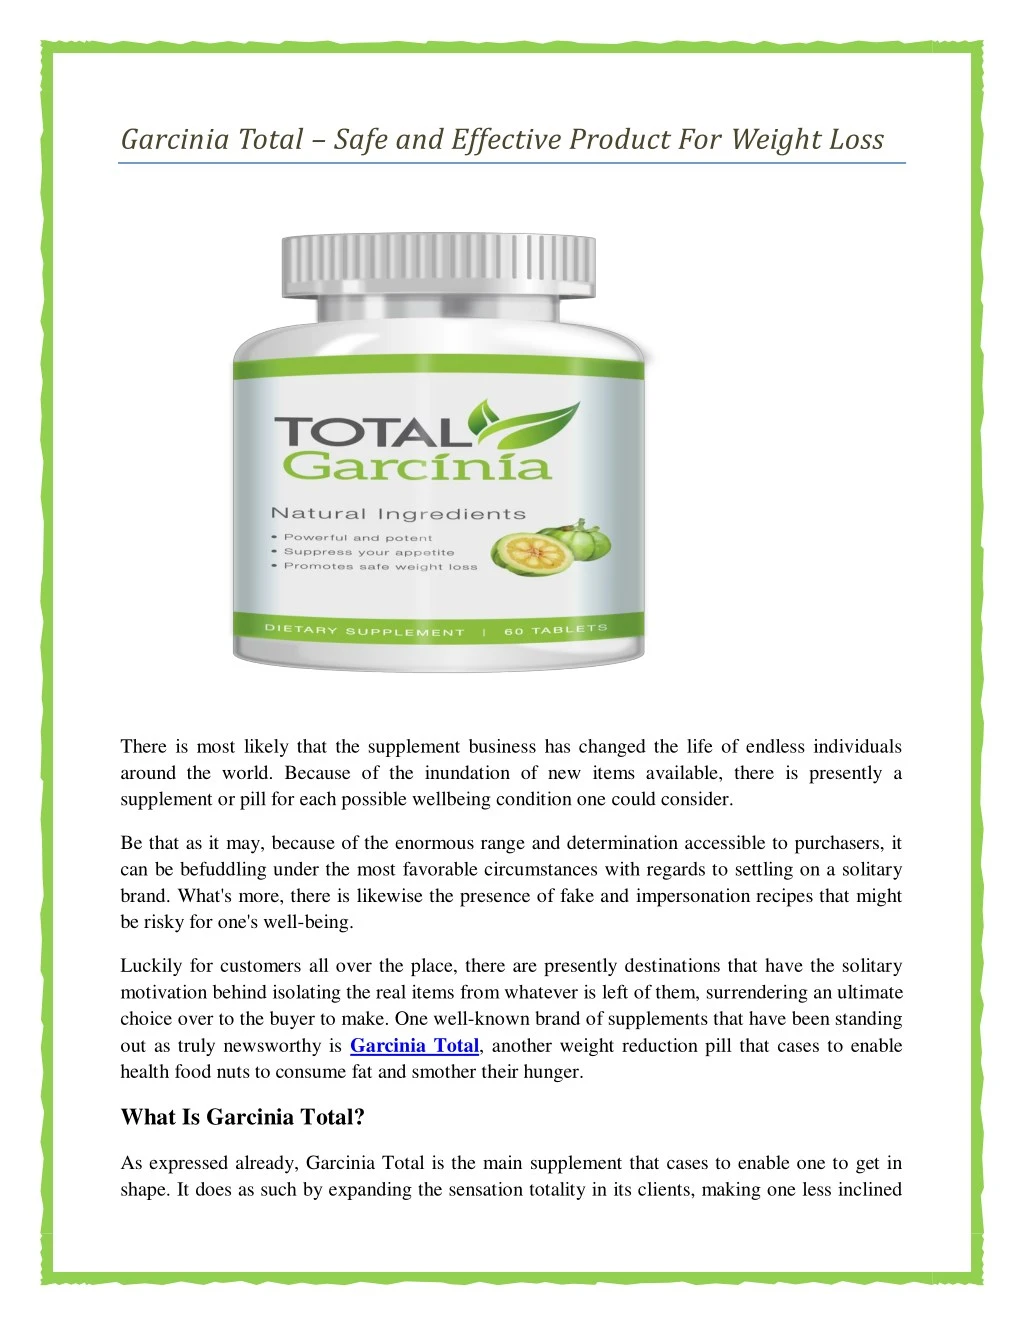 garcinia total safe and effective product